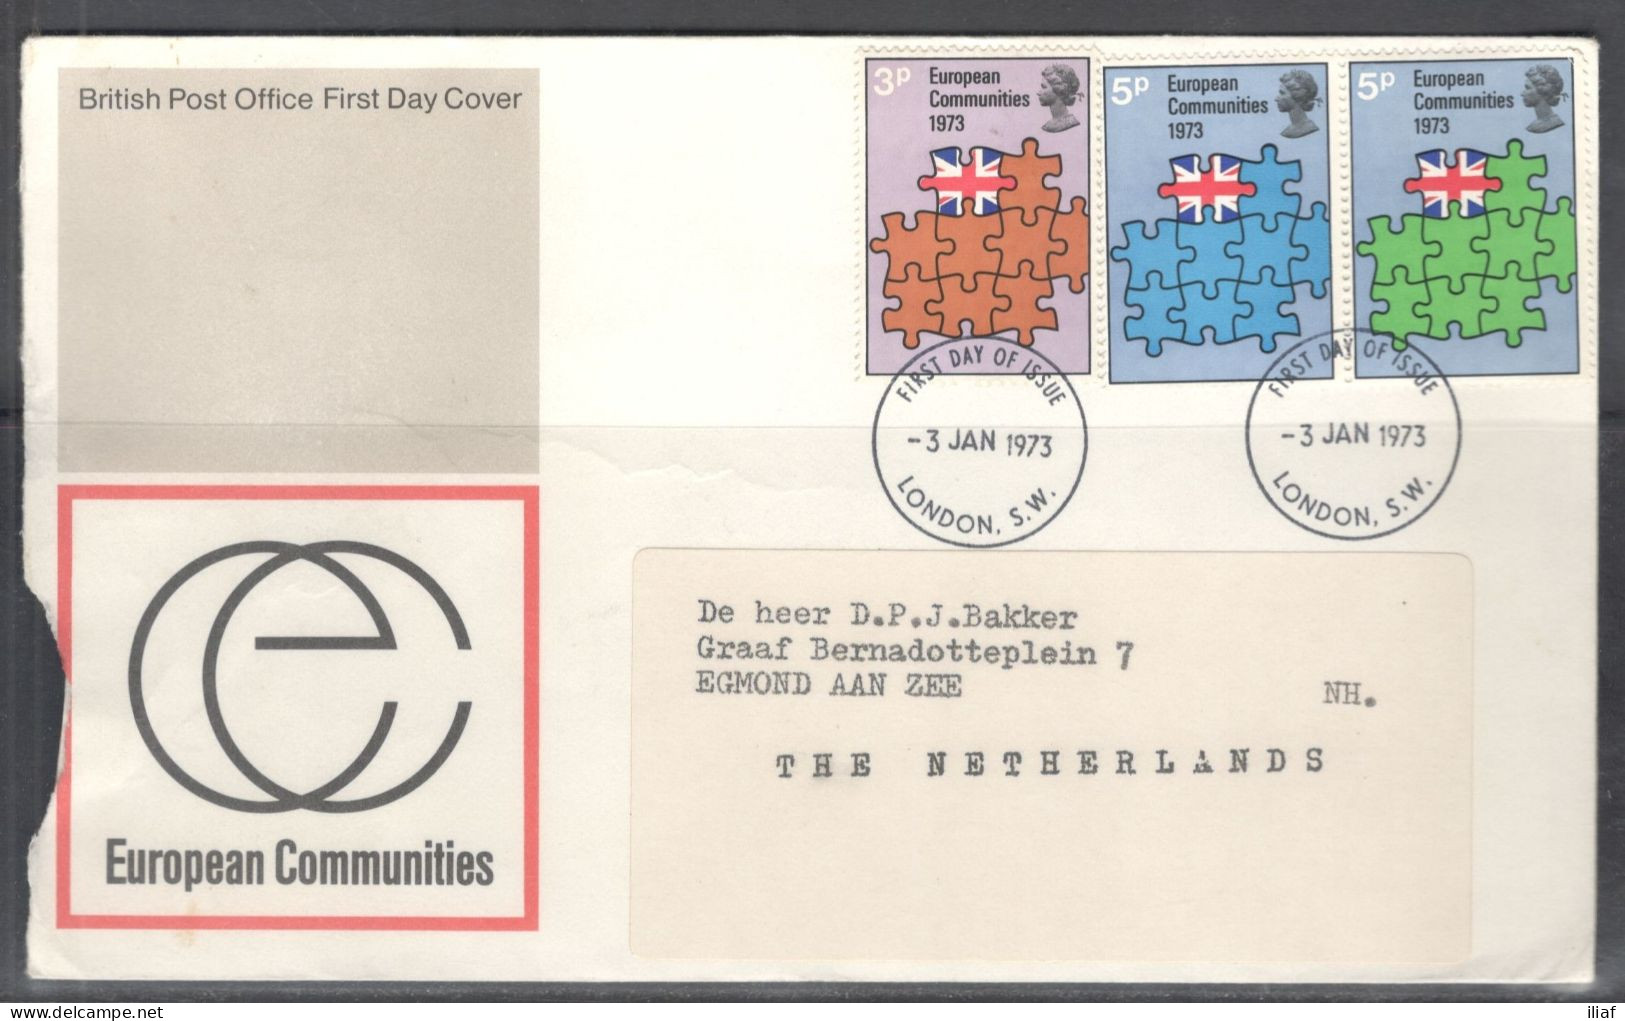 United Kingdom Of Great Britain.  FDC Sc. 685-687.  Britain's Entry Into EEC.  FDC Cancellation On FDC Envelope - 1971-1980 Decimale  Uitgaven